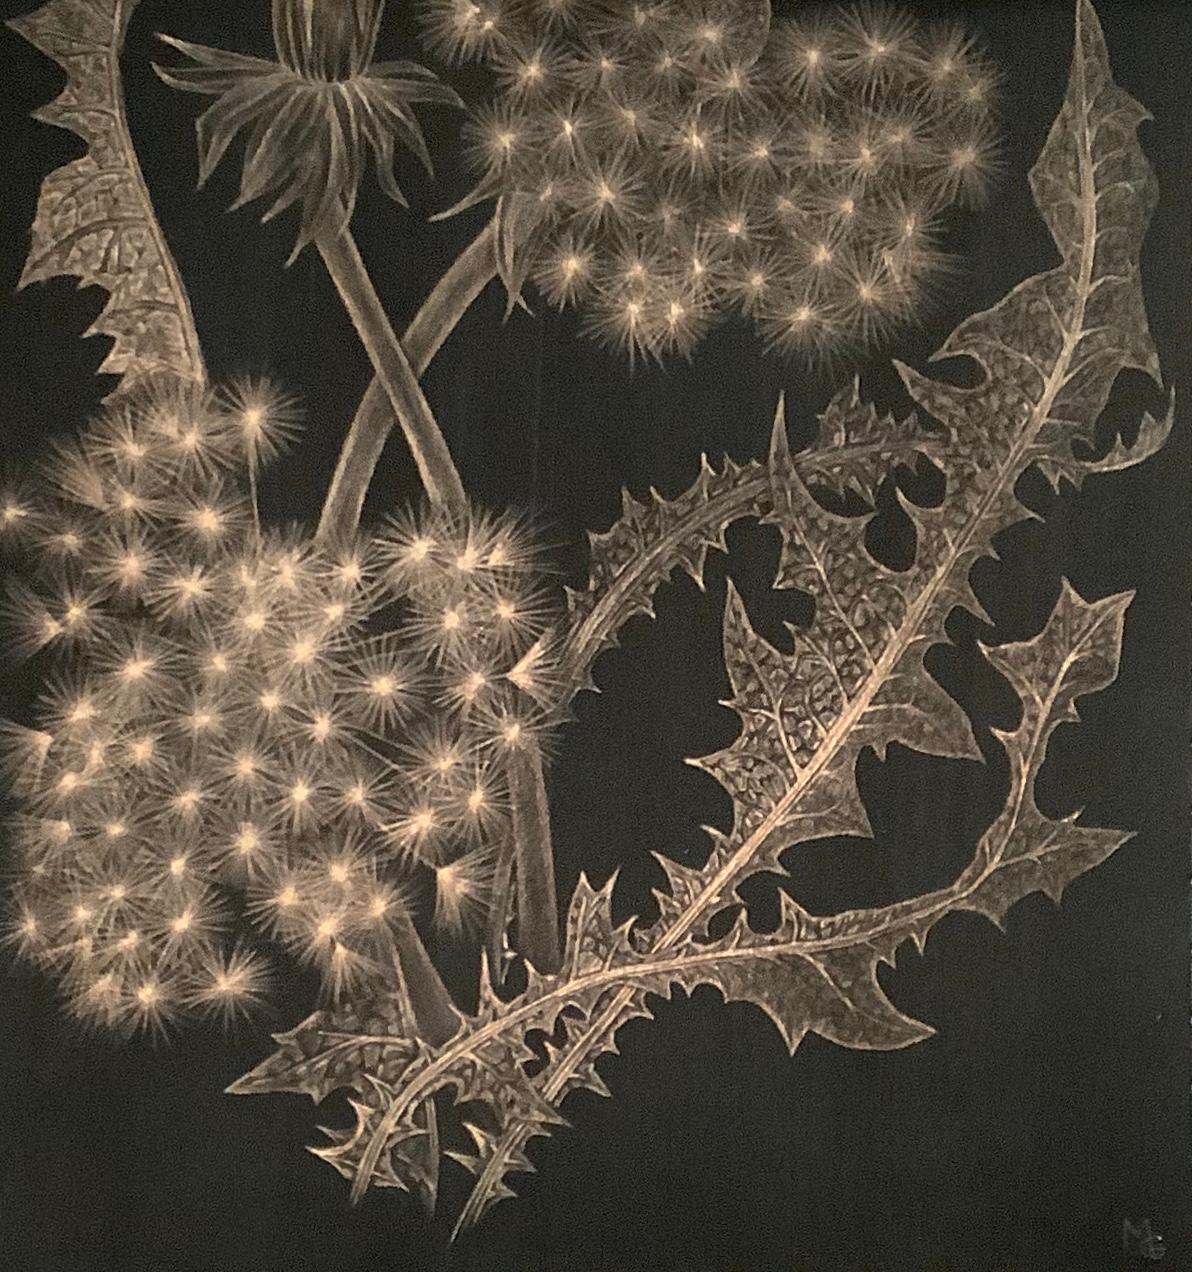 Dandelions with Bud, Small Botanical Drawing on Black Paper made with 14K Gold 4